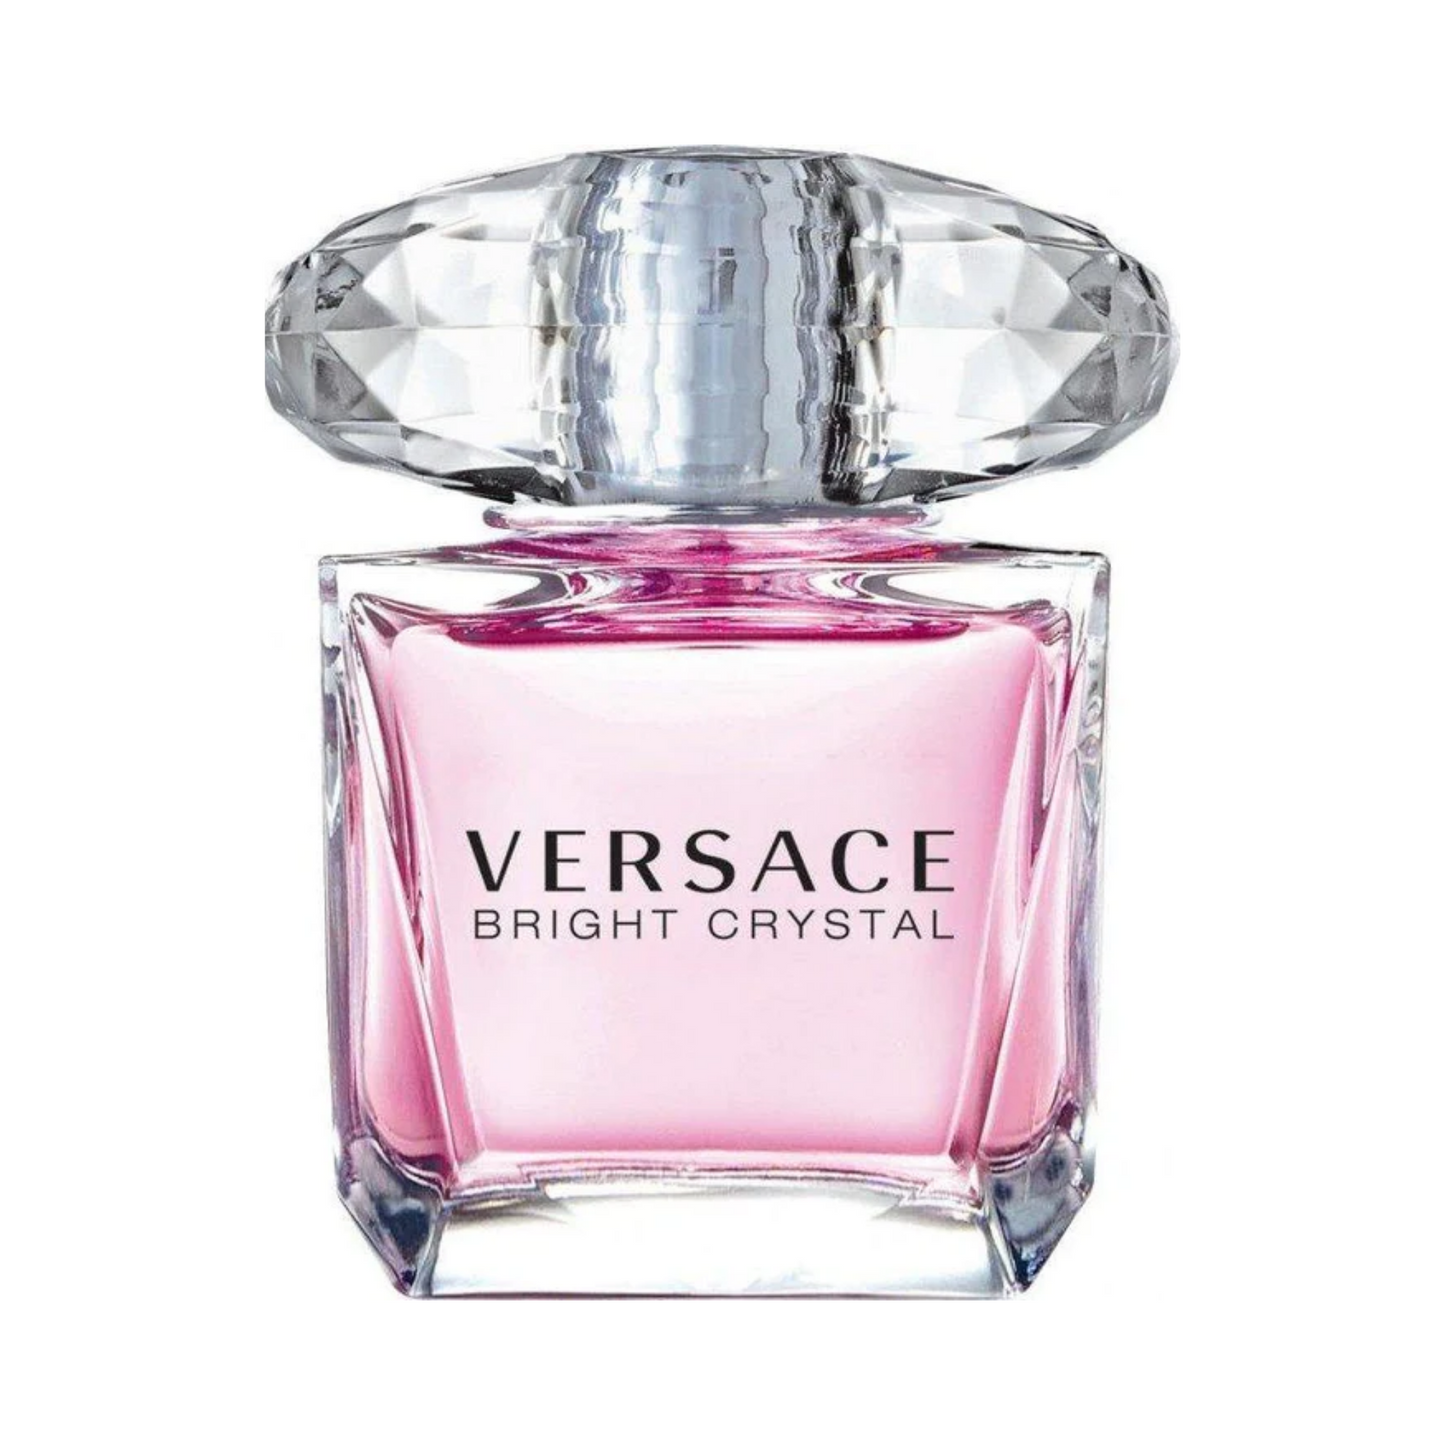 Versace Bright Crystal type Perfume for Women